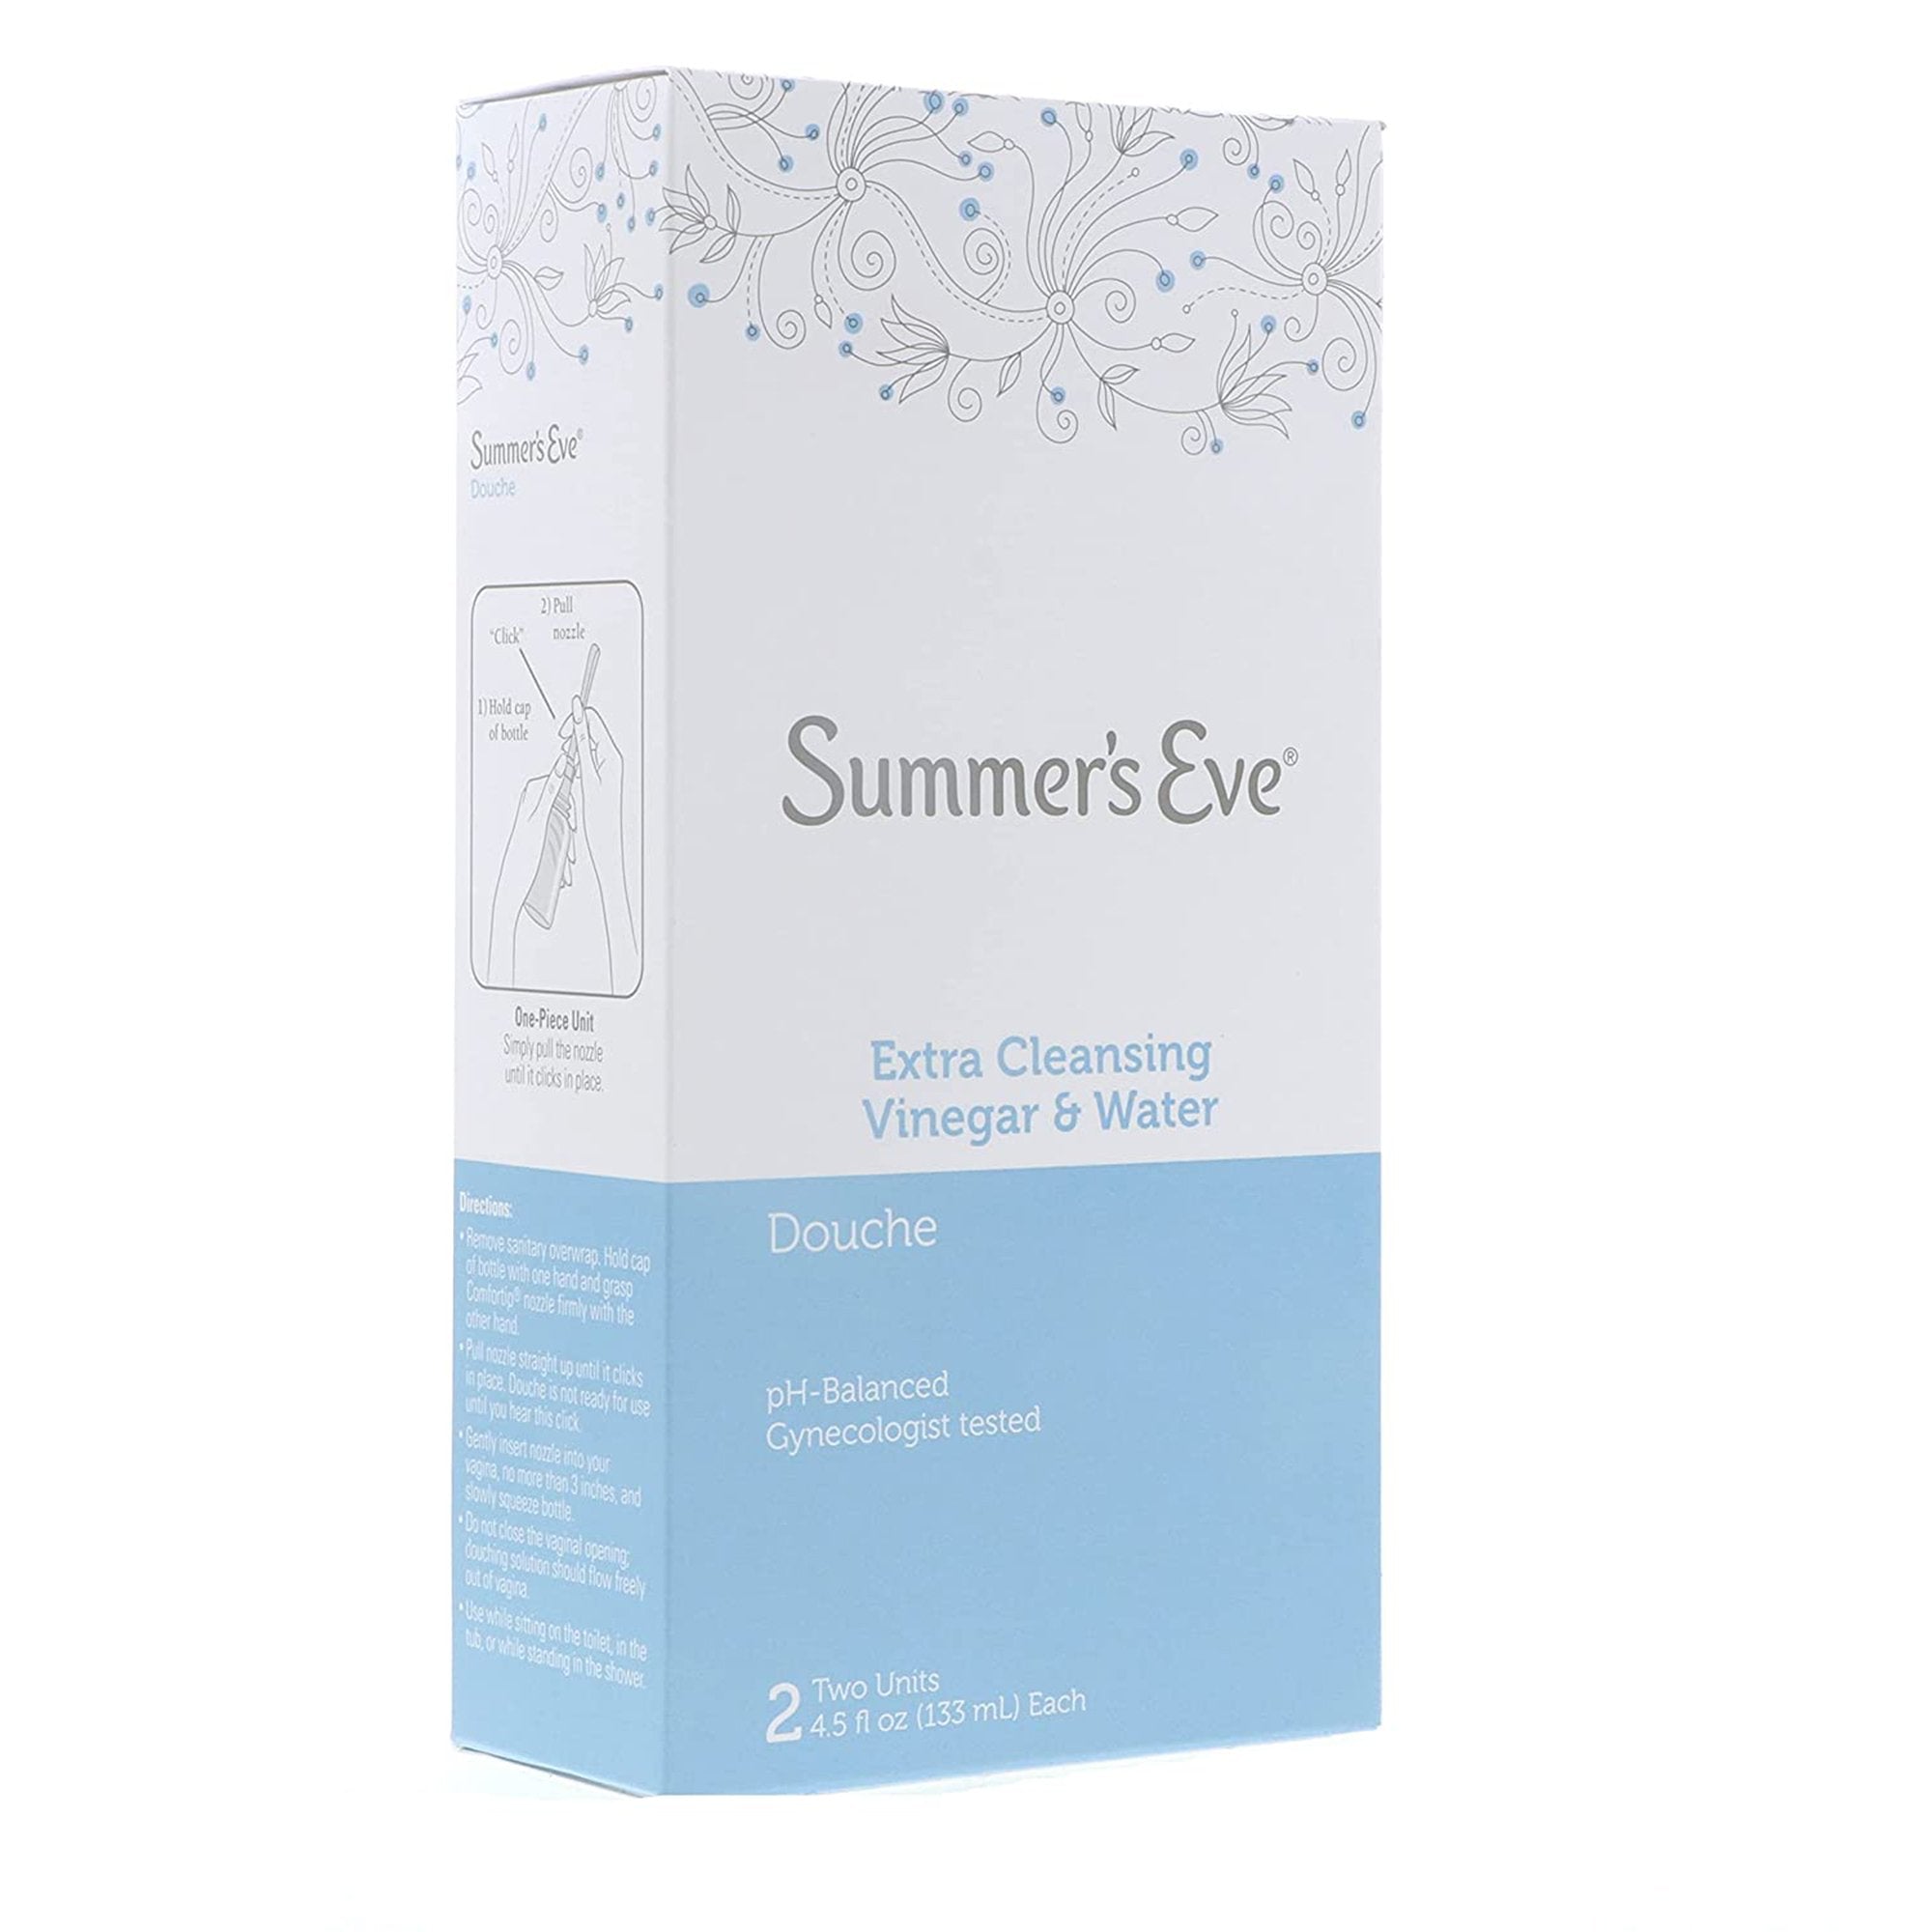 Douche Summer's Eve Vinegar and Water 4.5 oz.